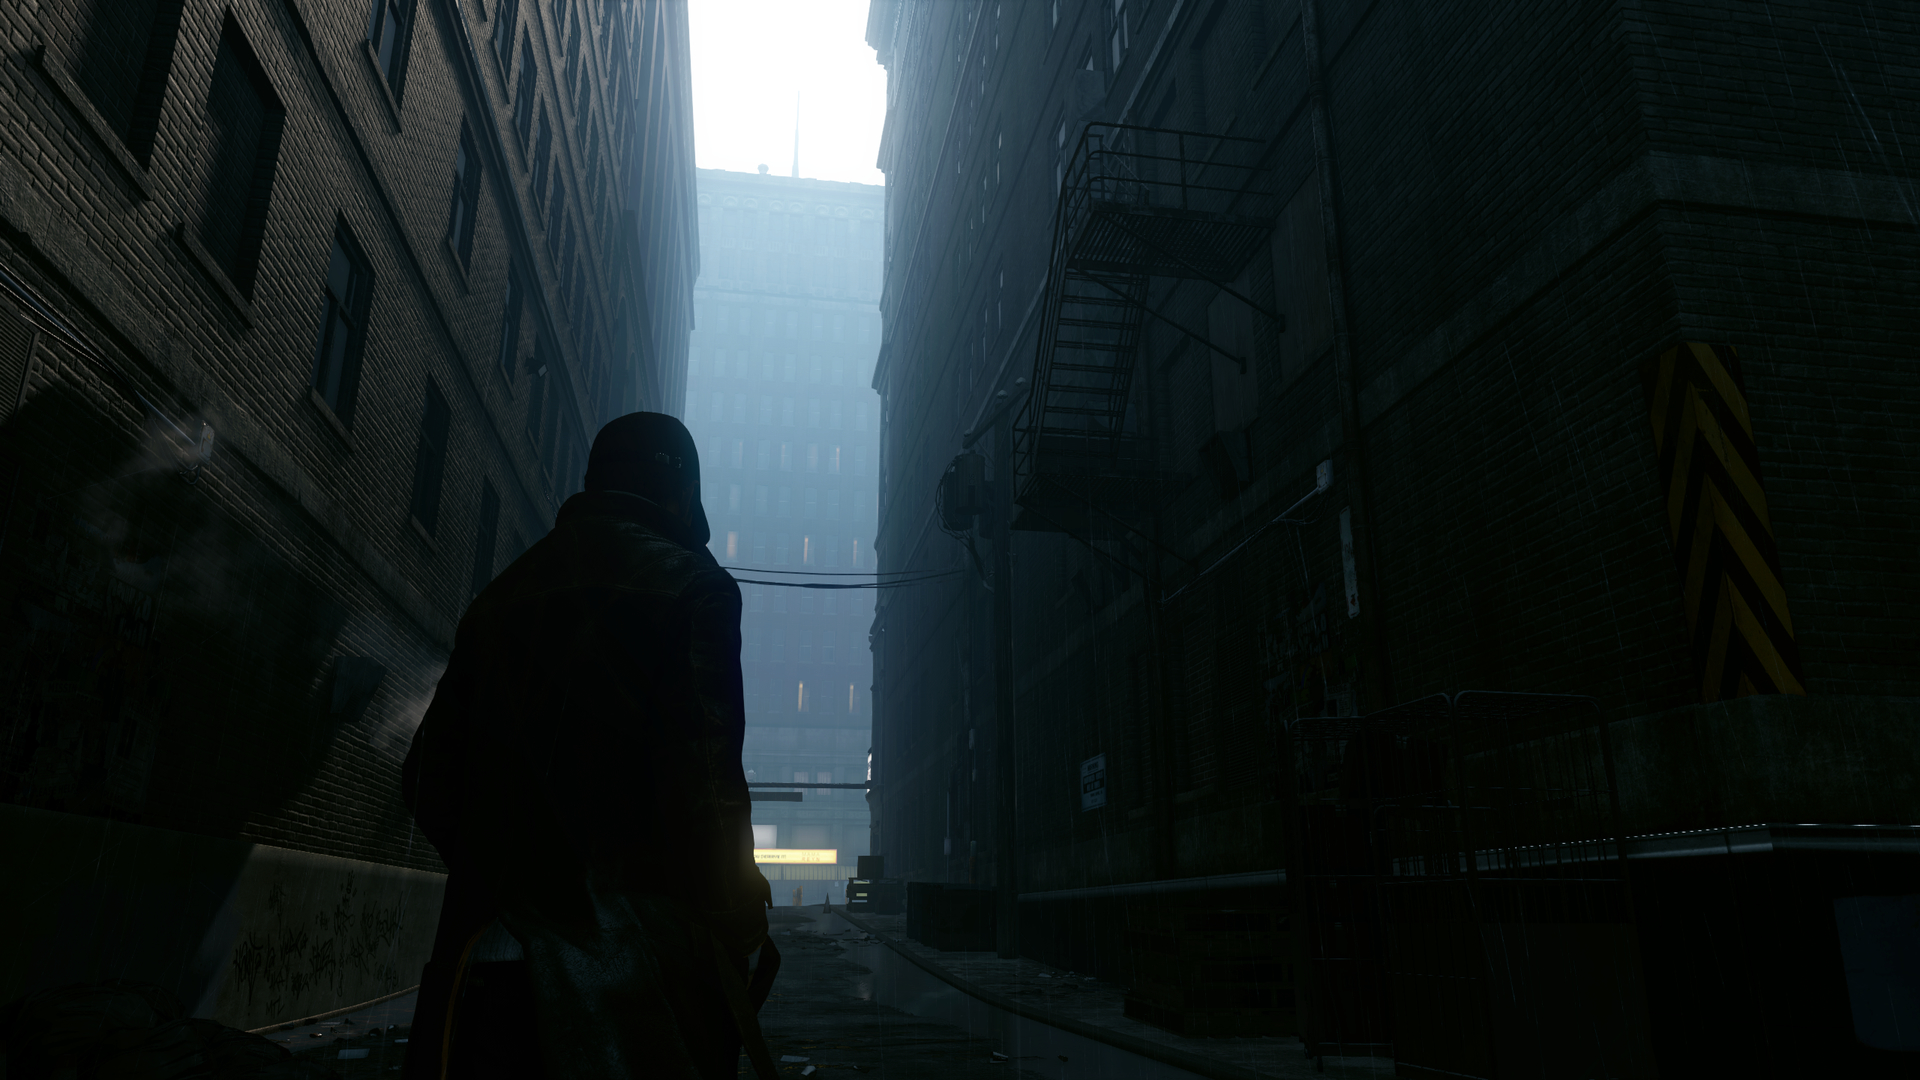 watch_dogs_exe_dx11_20140531_005541_1080p_by_confidence_man-d7keopy.jpg